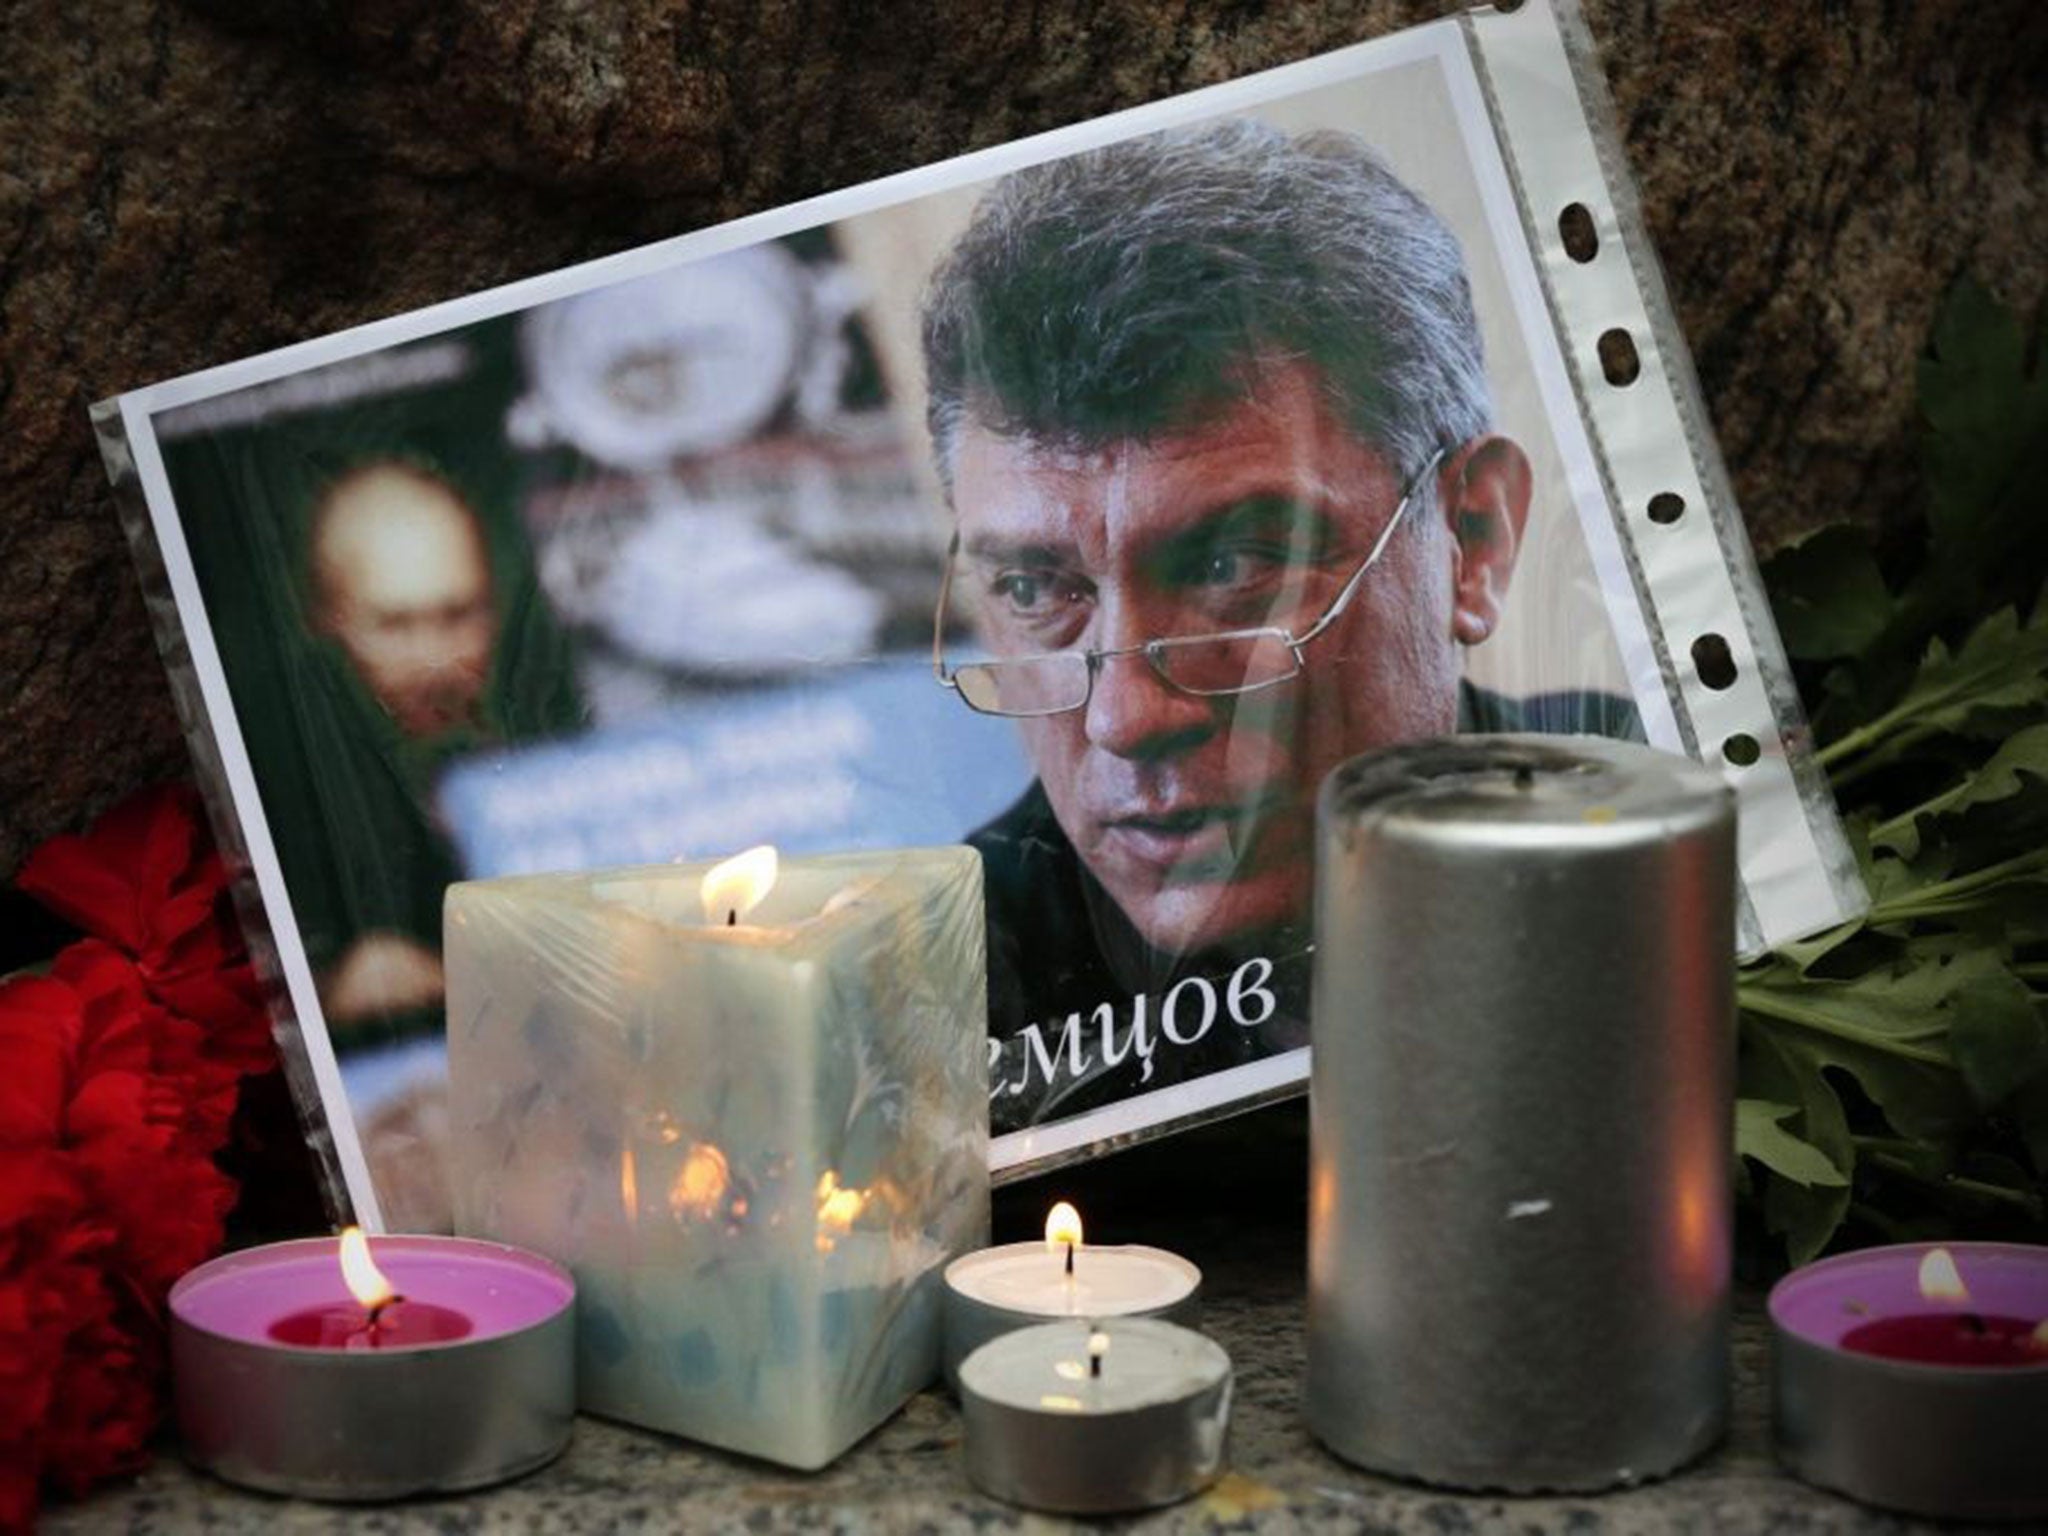 Russians lay flowers and light candles in memory of Boris Nemtsov at the monument of political prisoners 'Solovetsky Stone' in St. Petersburg, Russia, 28 February 2015.